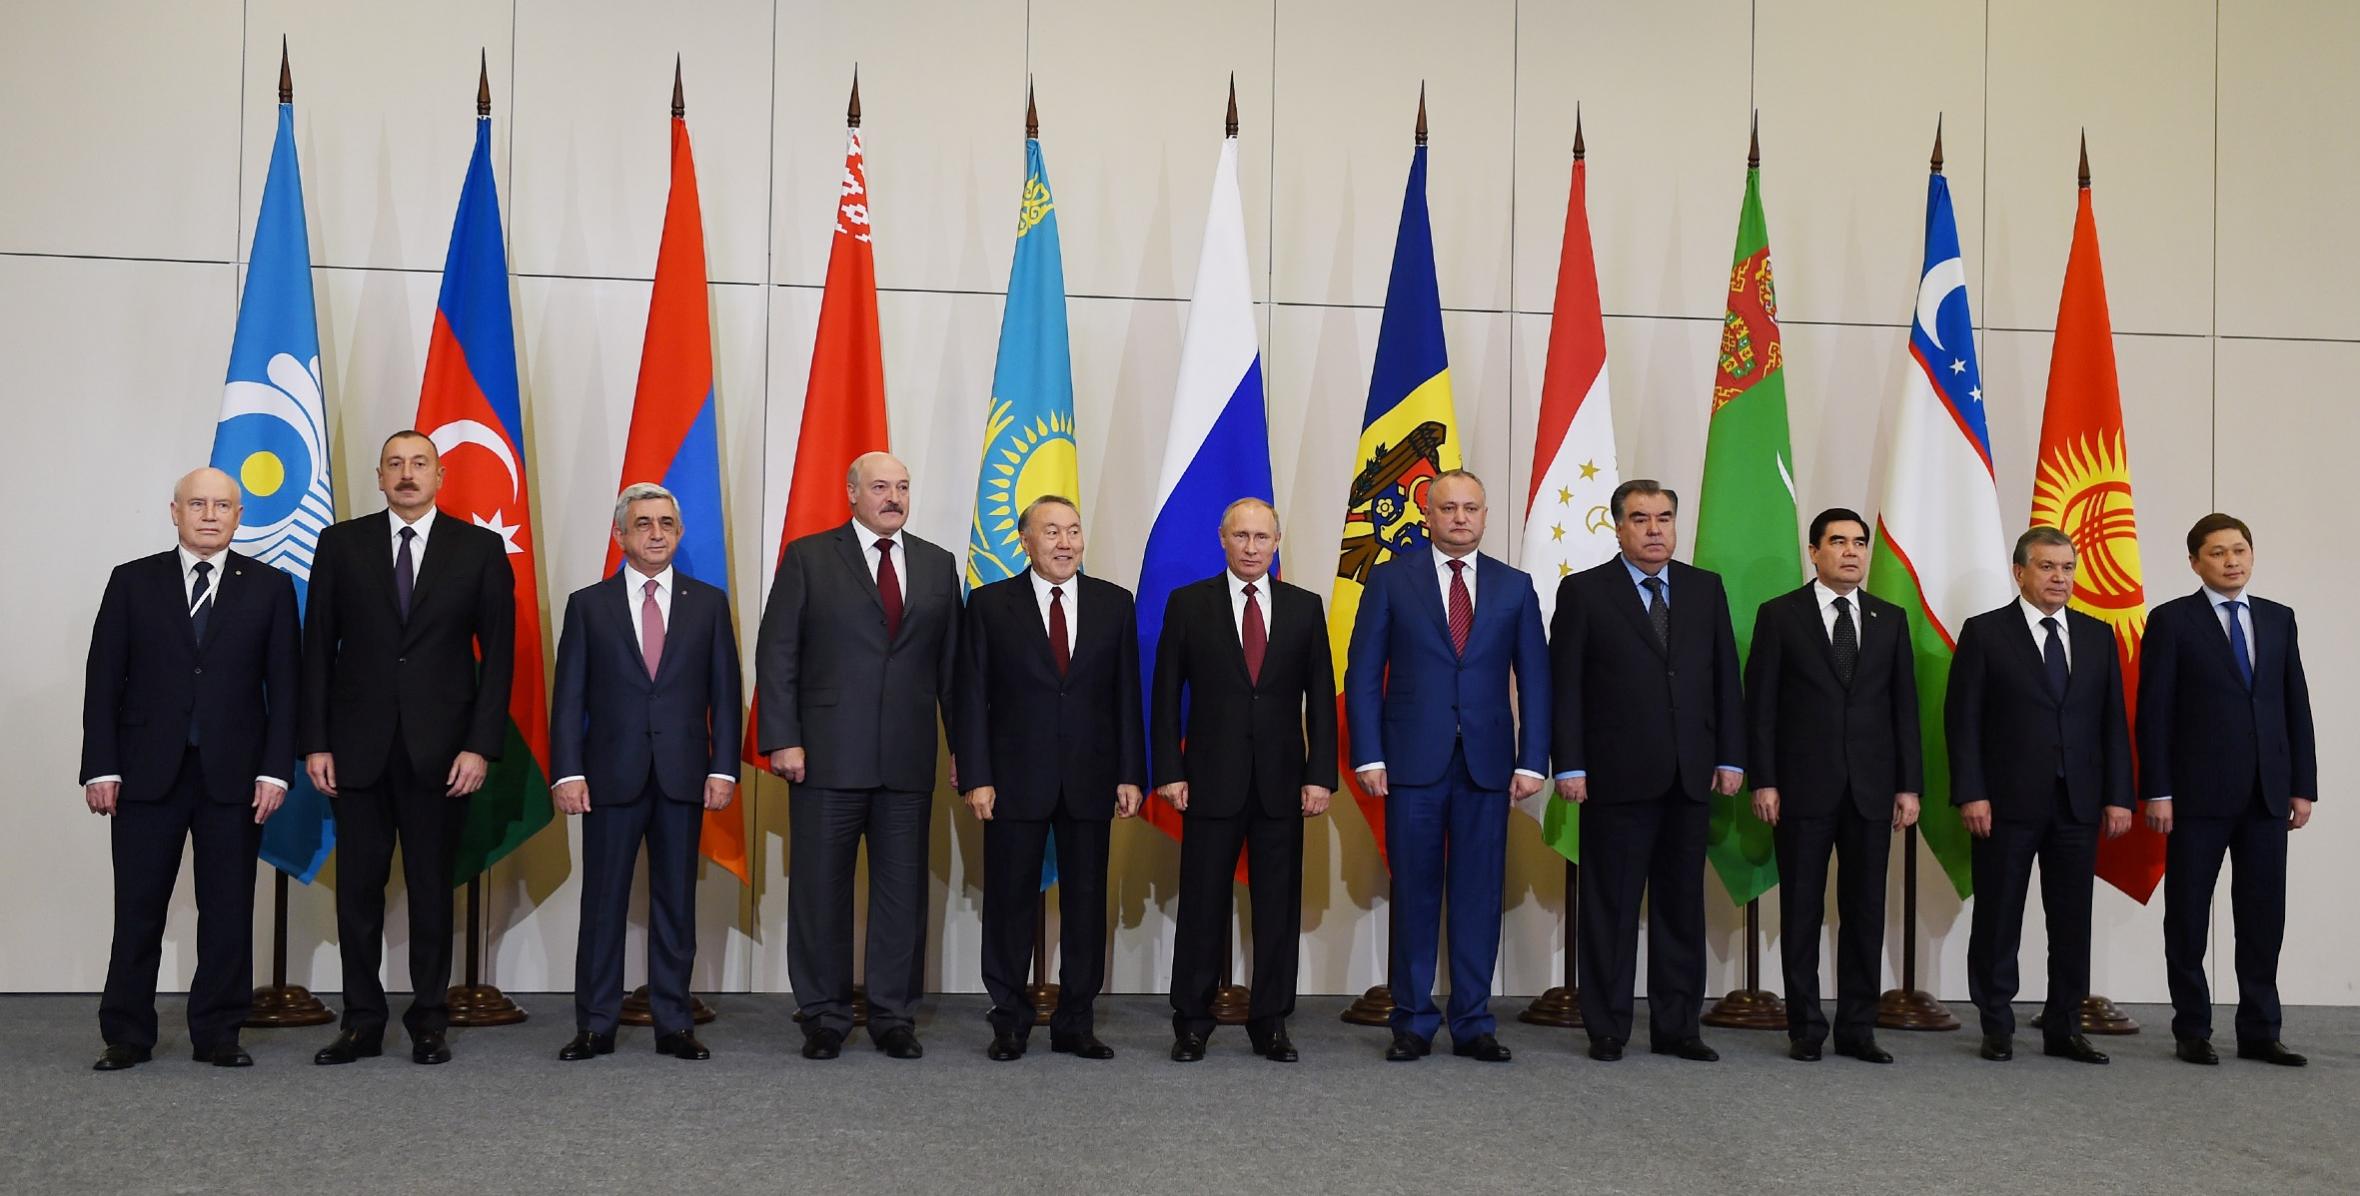 Ilham Aliyev attended CIS Heads of State Council's session in limited format in Sochi